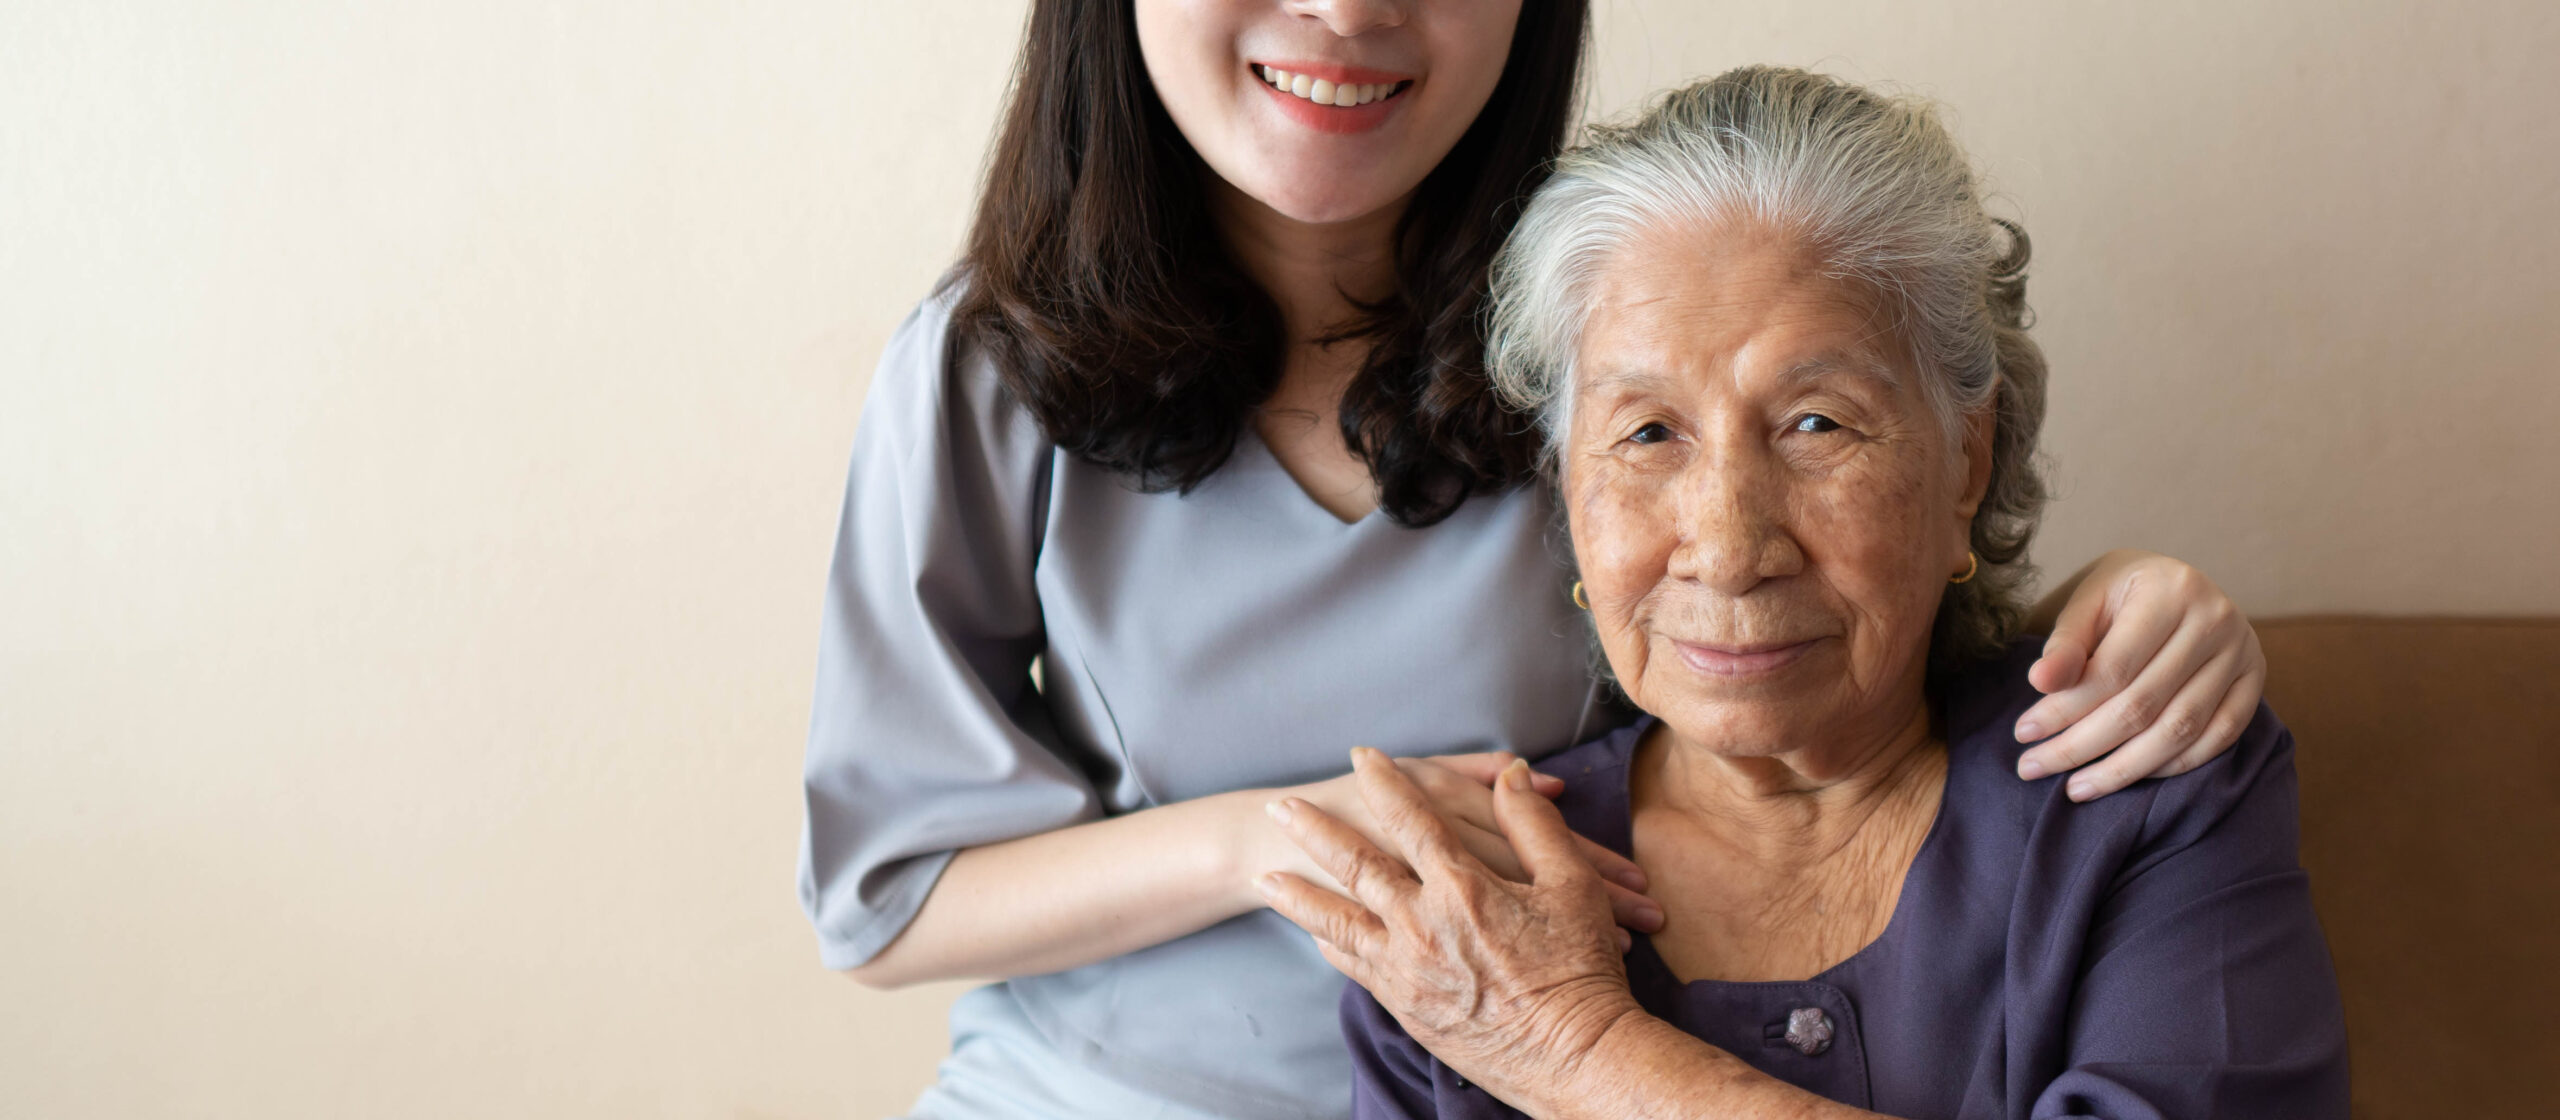 Common questions about hospice care